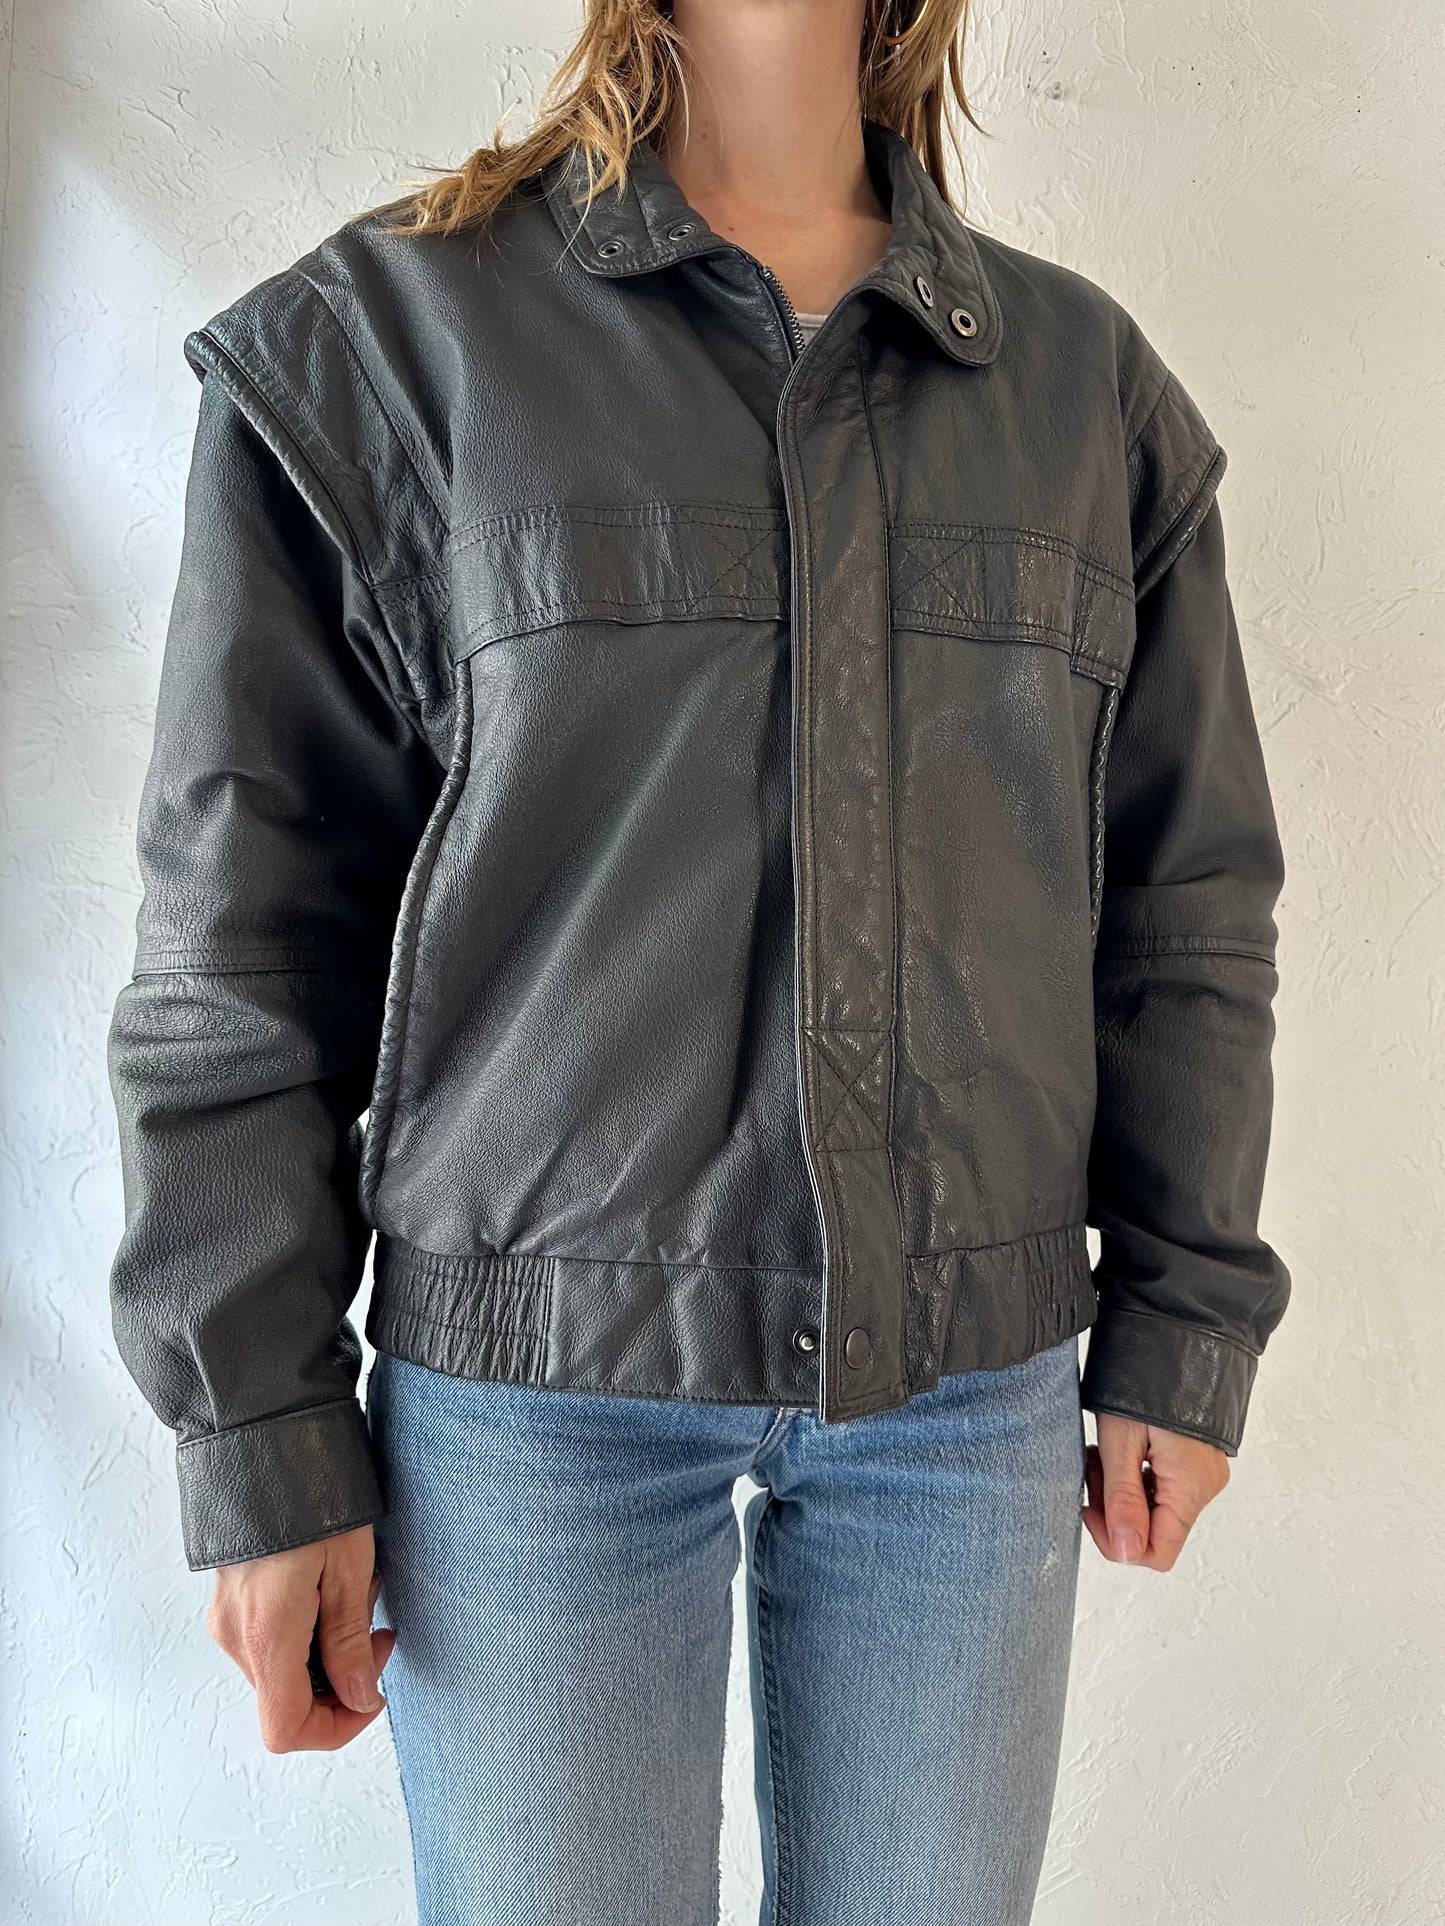 90s 'Phase 2' Faux Fur Lined Gray Leather Jacket / Small